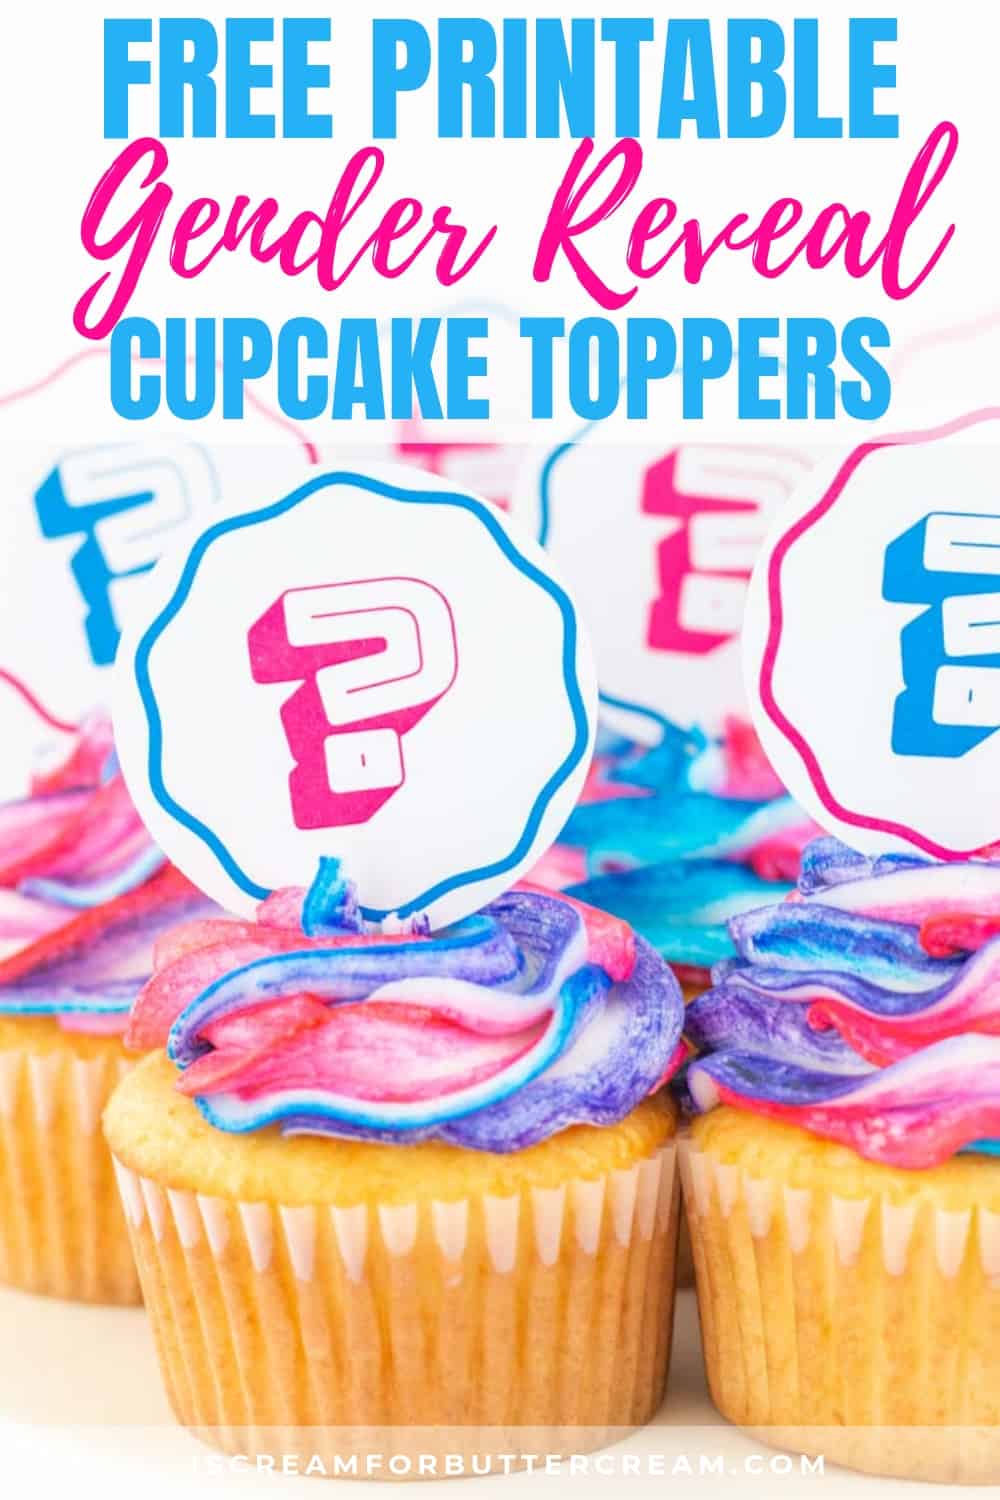 Gender Reveal Cupcakes with Printable Toppers New Pin 2